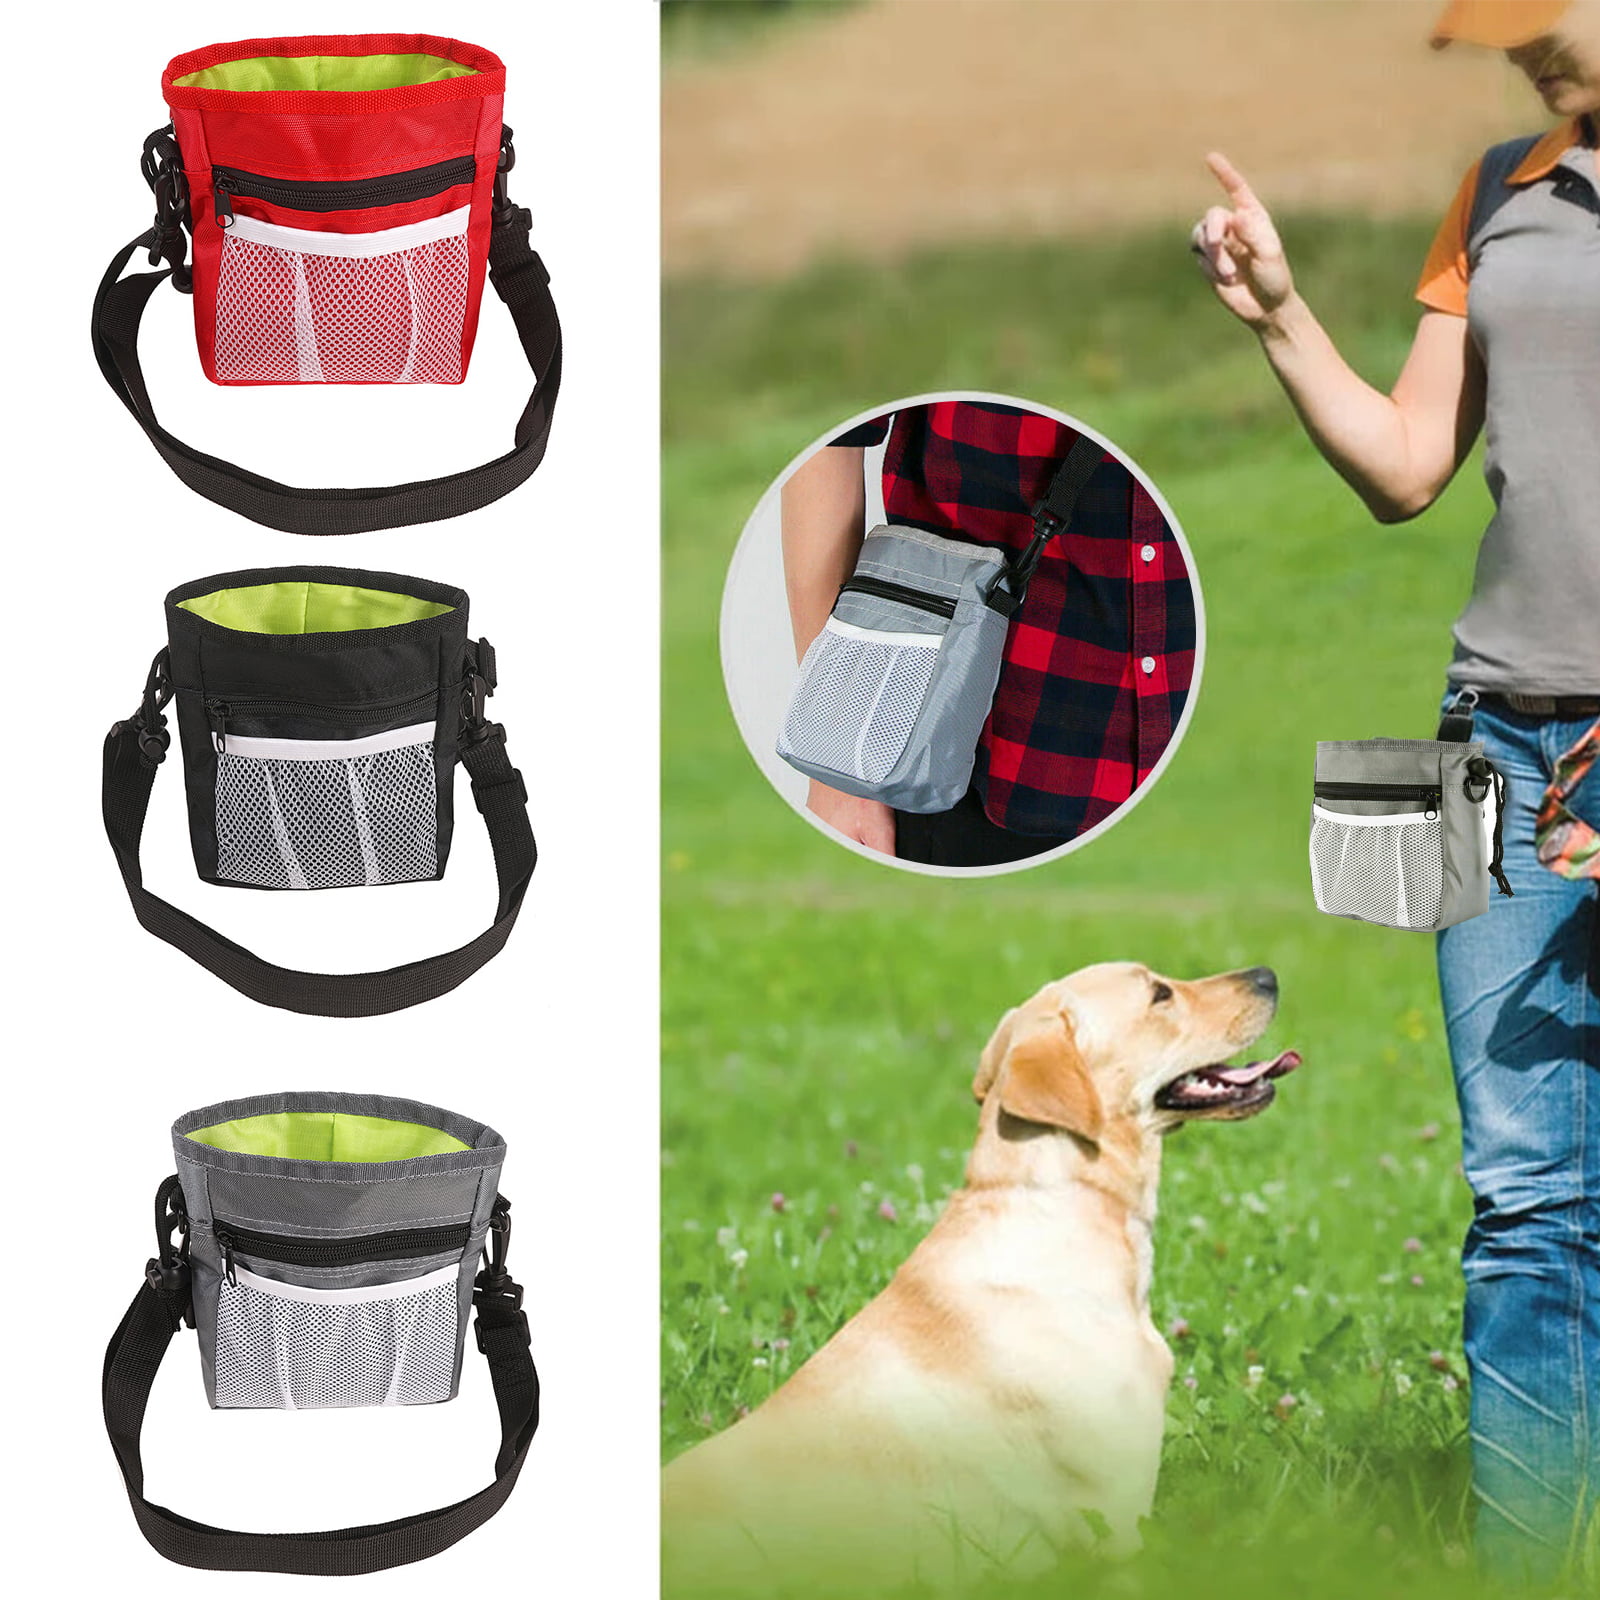 Greeney Dog Treat Pouch,Dog Training Bag Use for Hold Pet Toys Kibble Treats Poop Bag Outdoor 